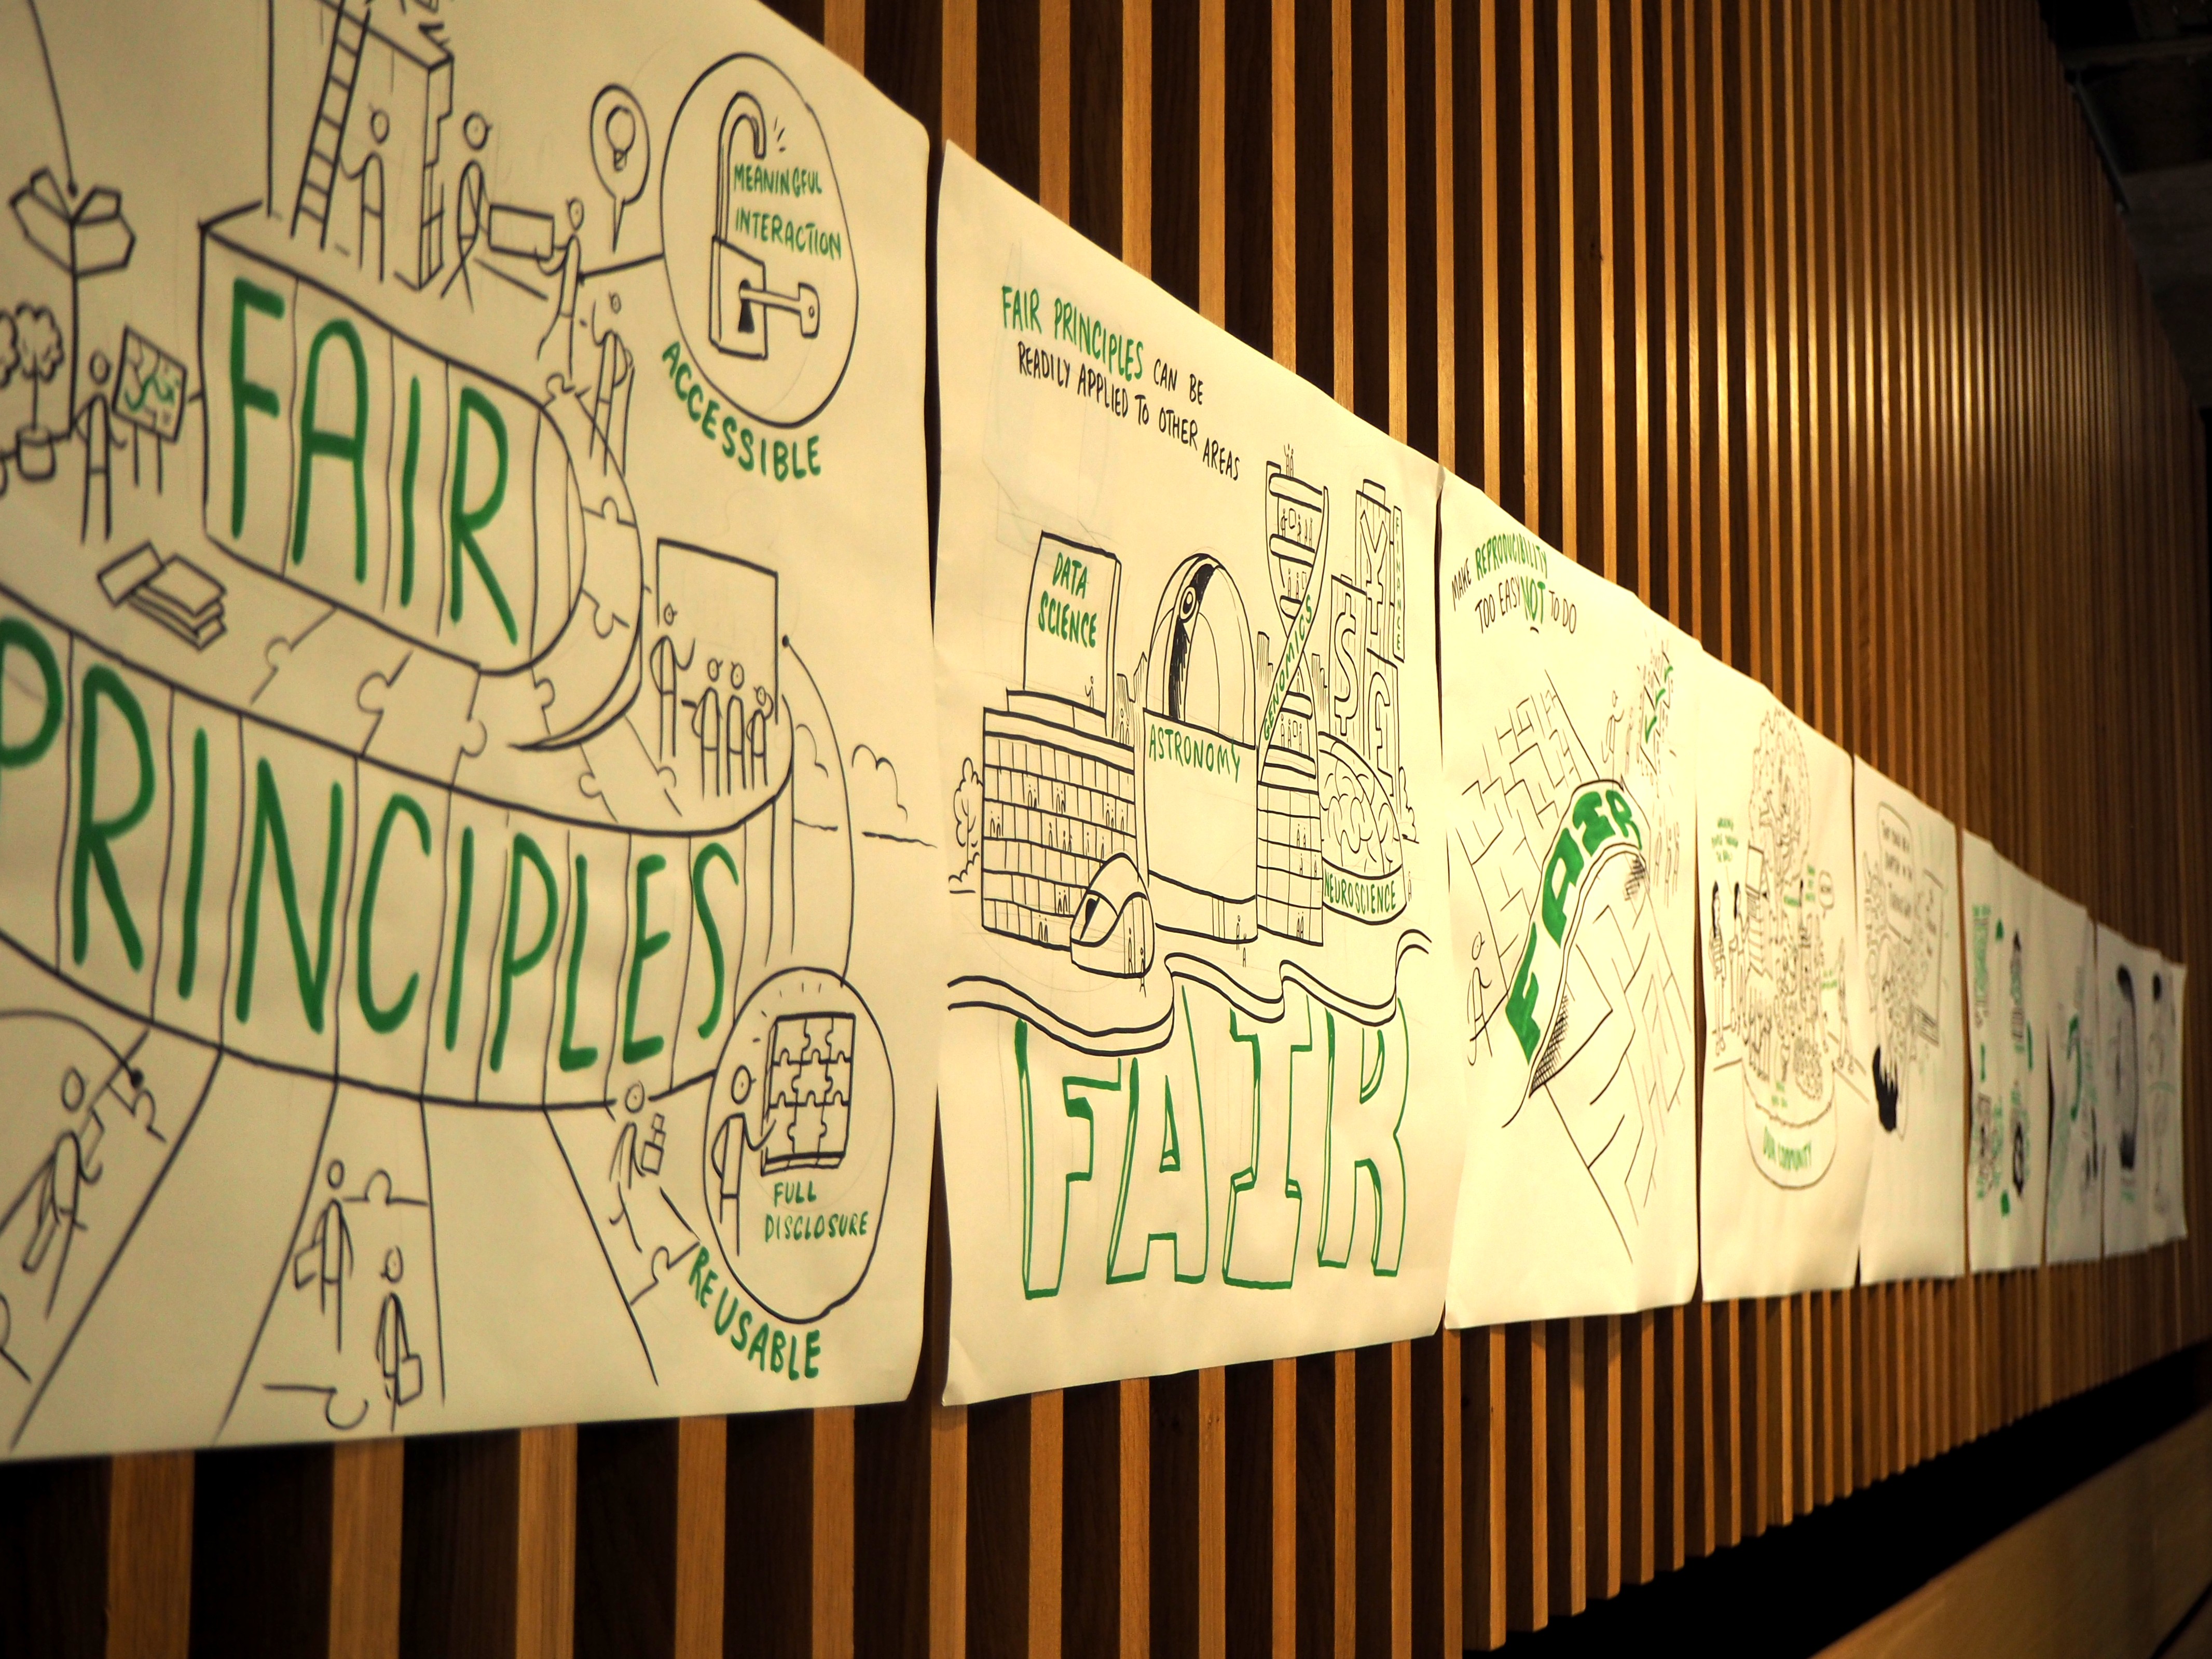 A set of hand-drawn sketches about stuck horizontally against a textured wooden wall. The first three sketches describe FAIR principles (findable, accessible, interoperable and reusable). Other three images are blurry.